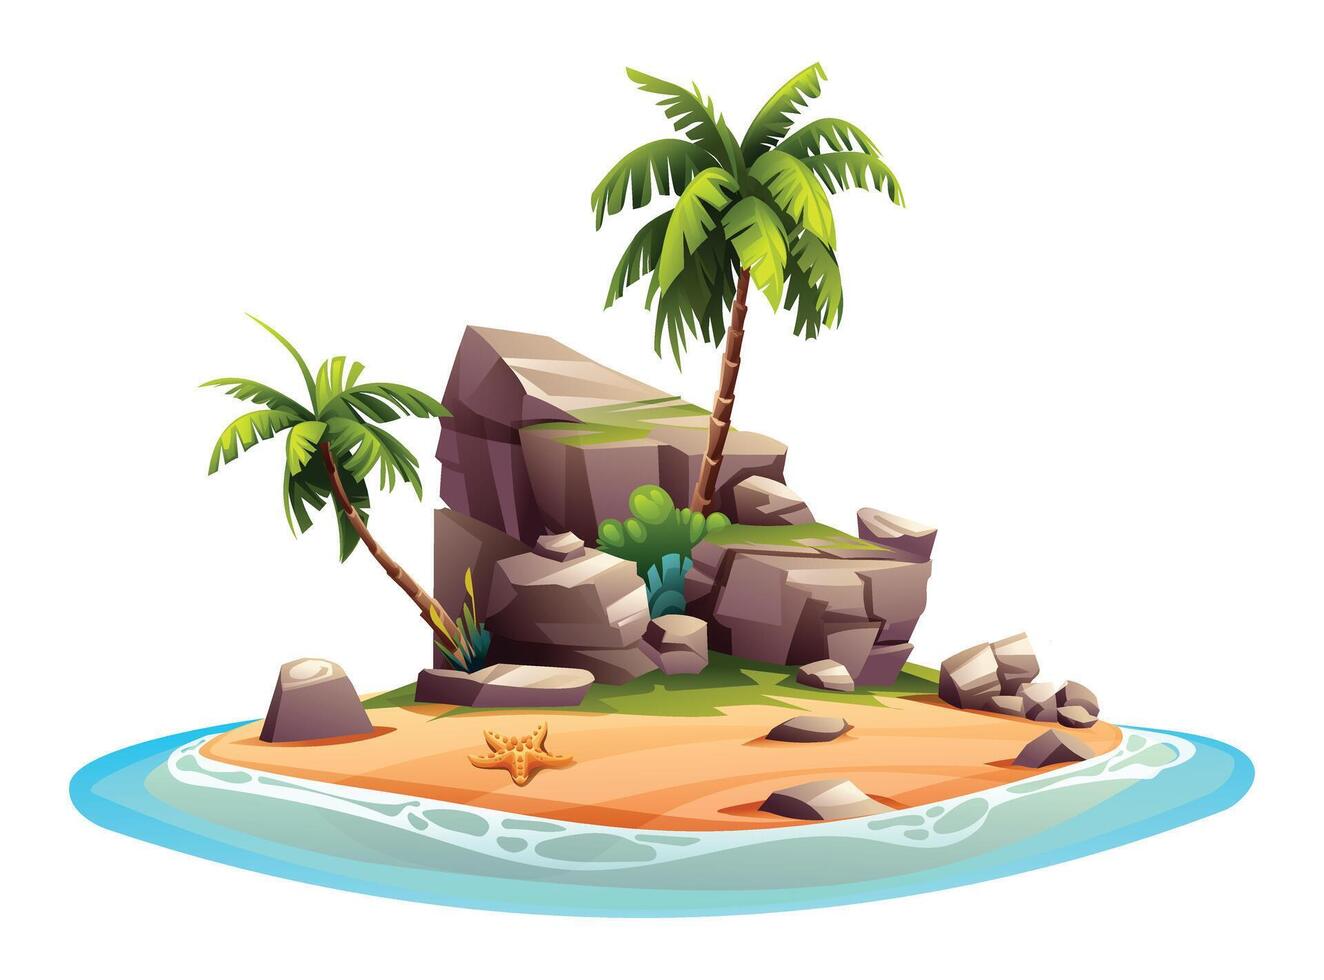 Tropical island with palm trees and rocks cartoon vector illustration isolated on white background